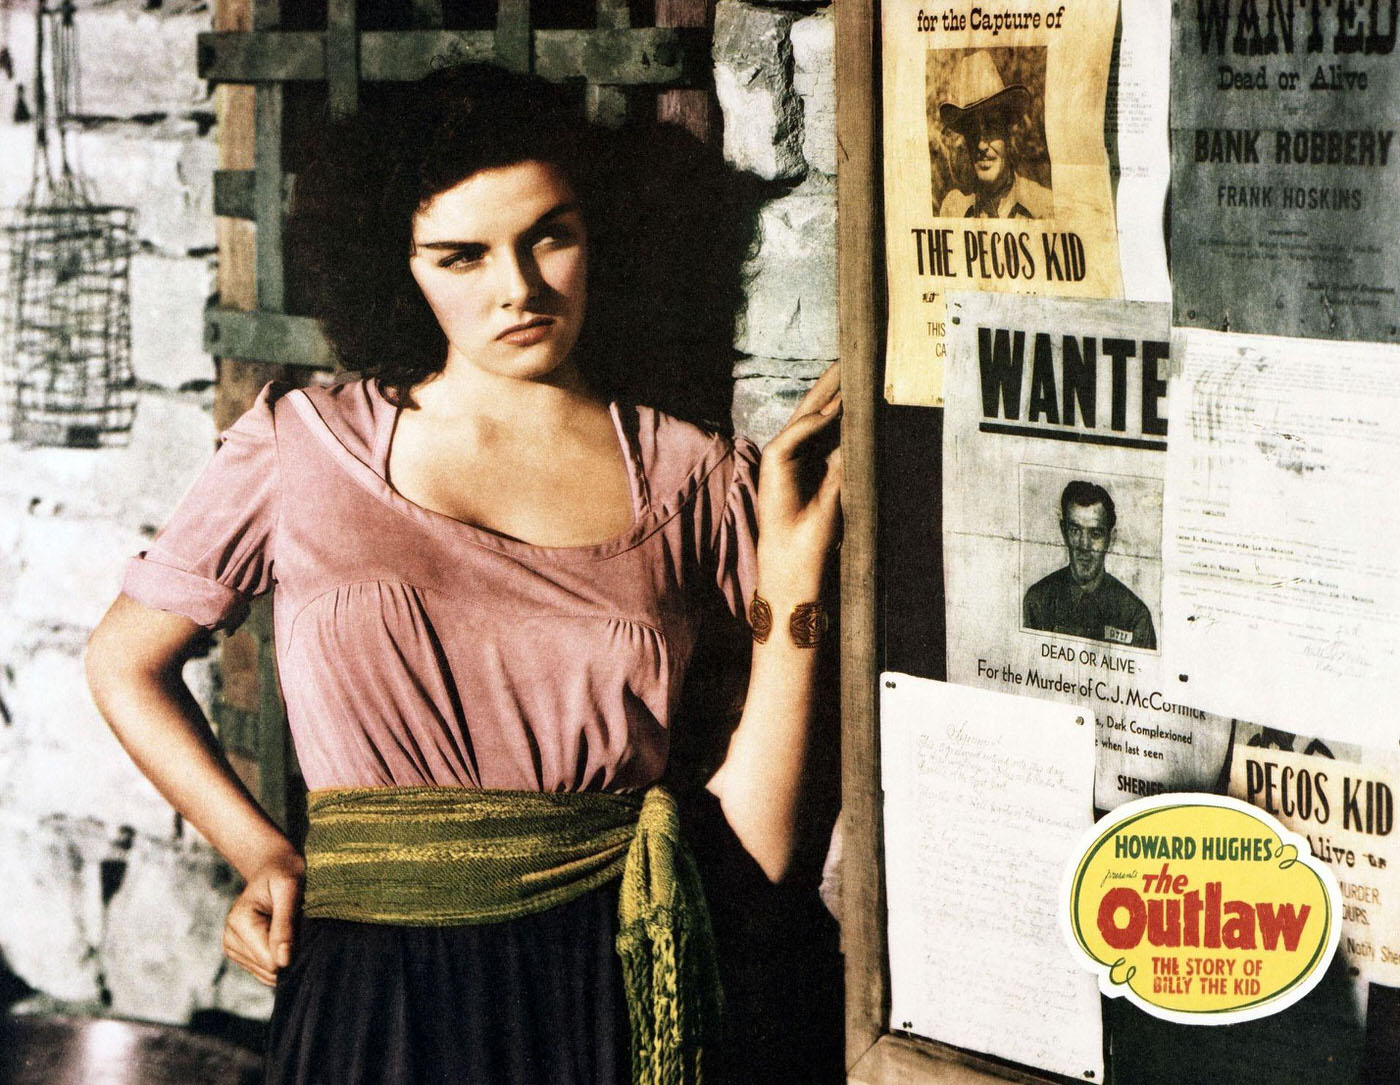 A lobby card for Howard Hughes' 1943 western 'The Outlaw', starring Jane Russell.